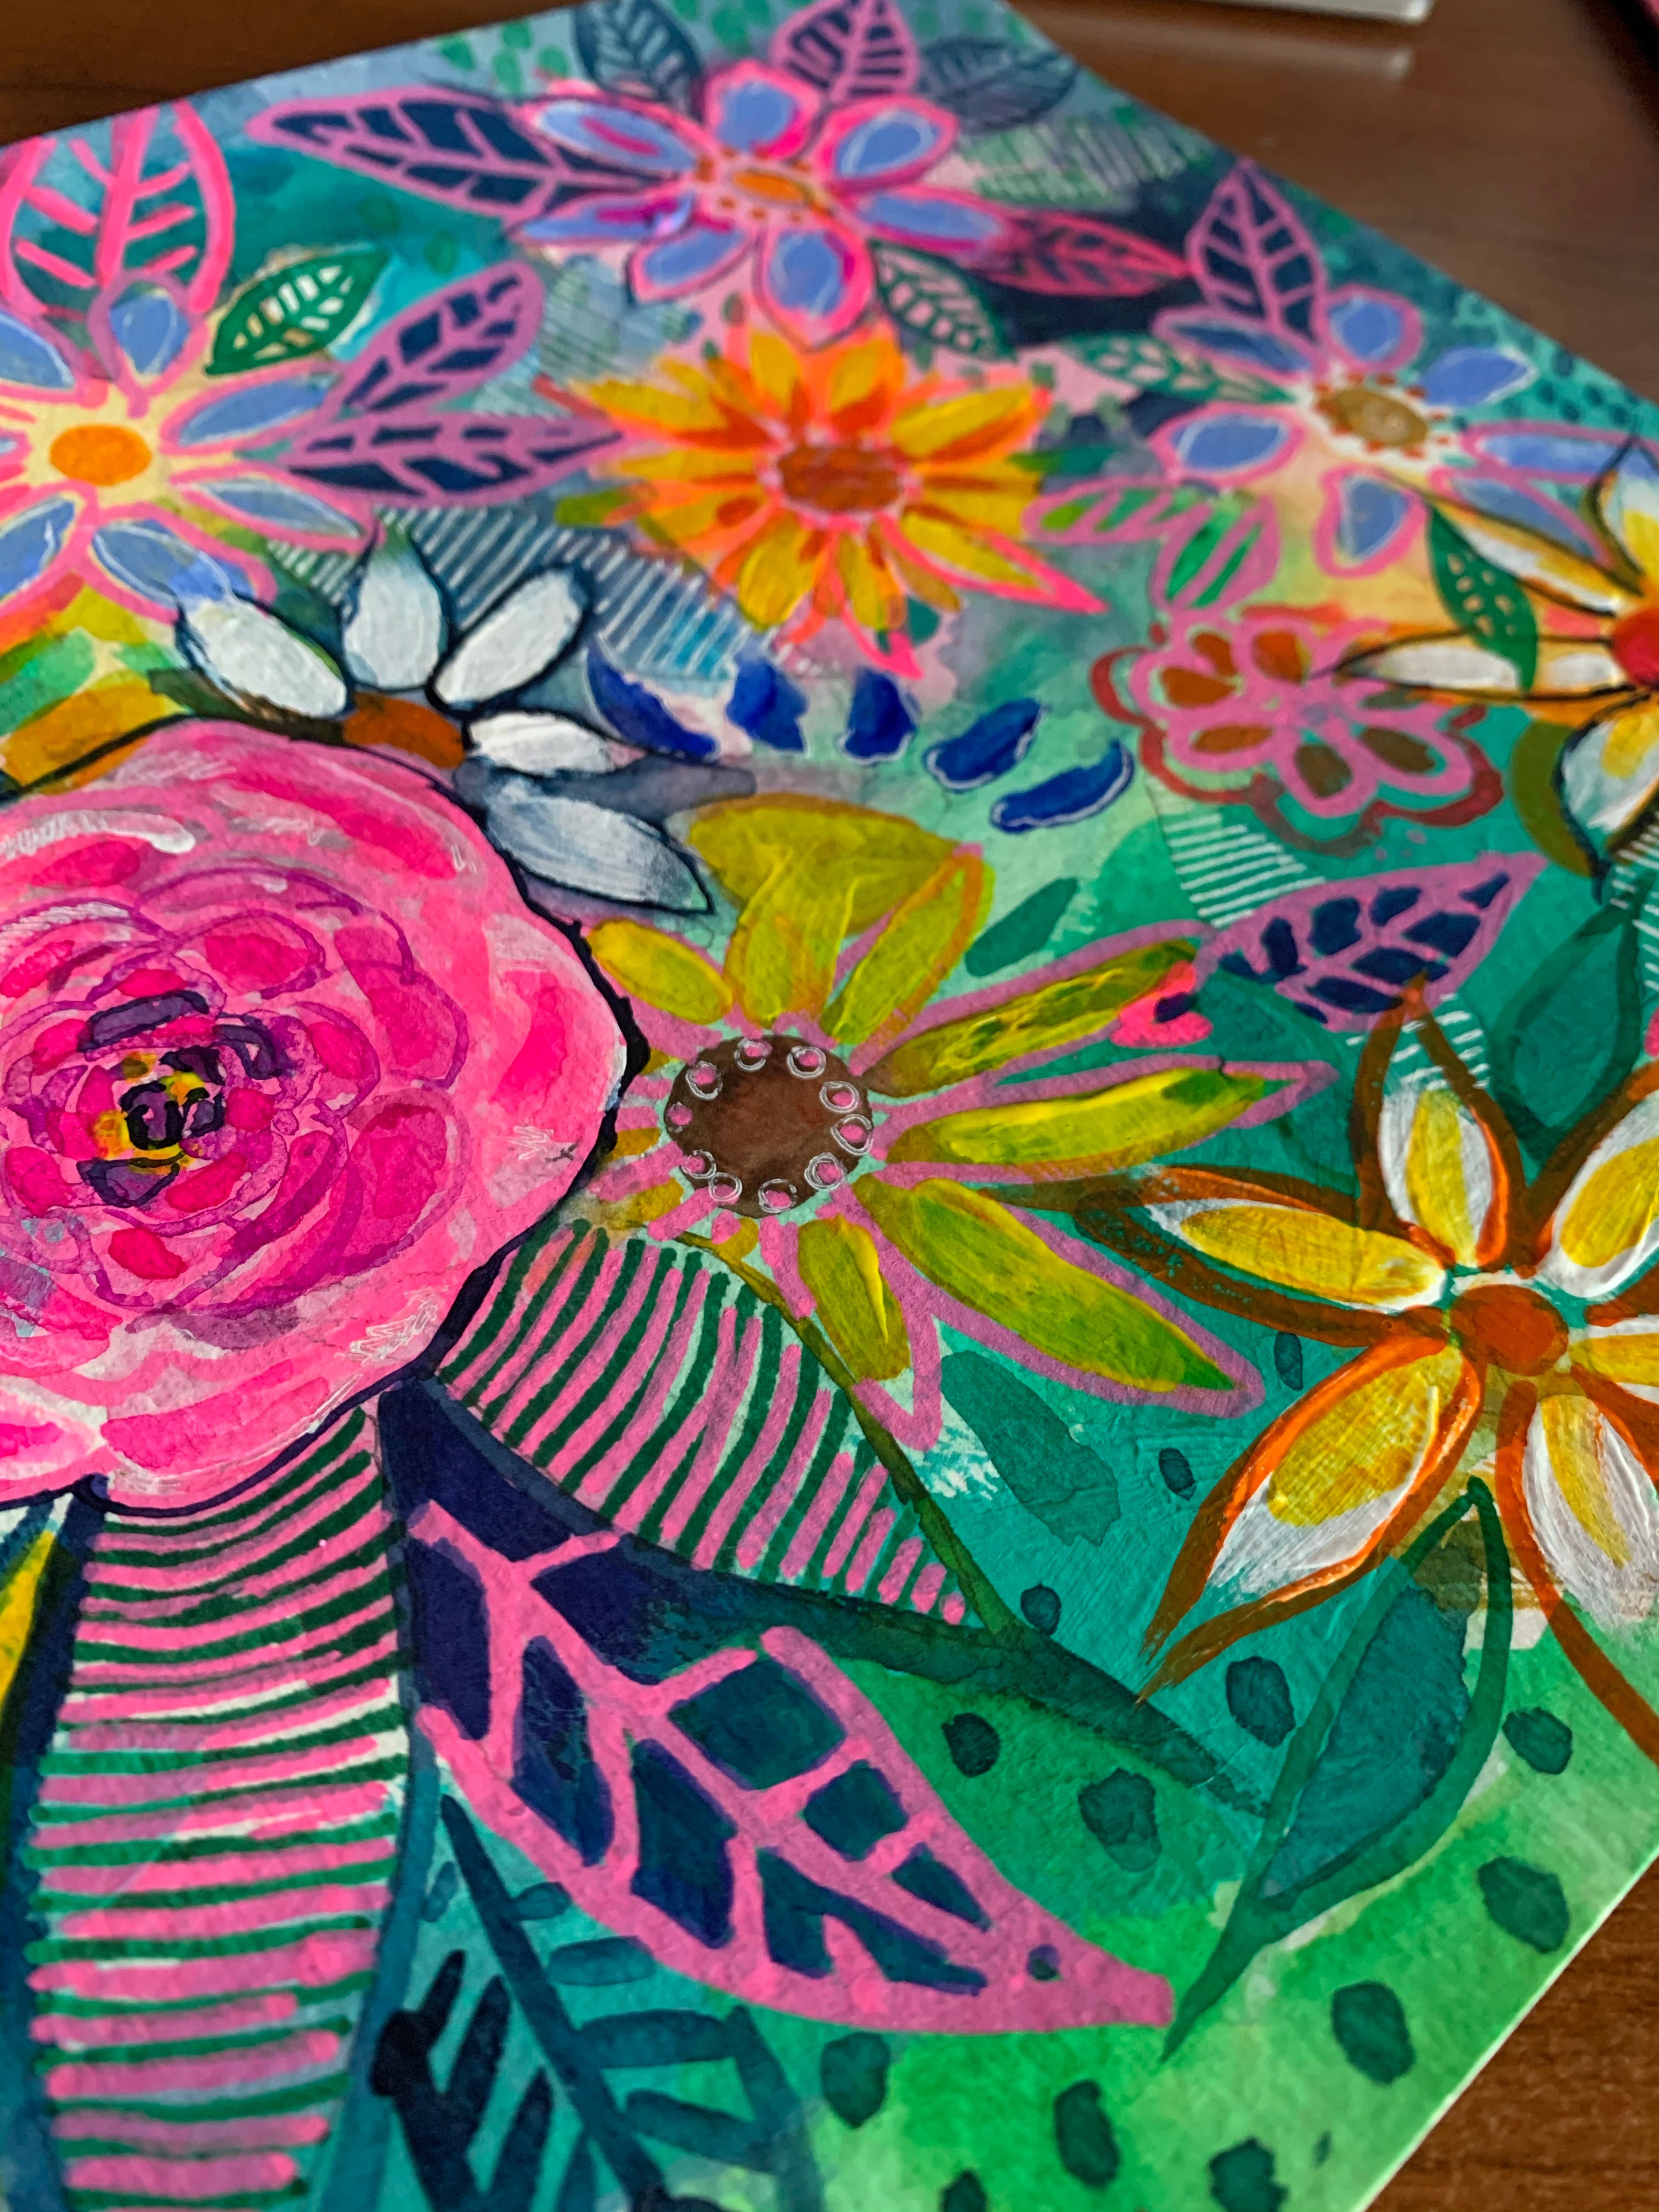 Neon Bright Mixed Media Floral Painting